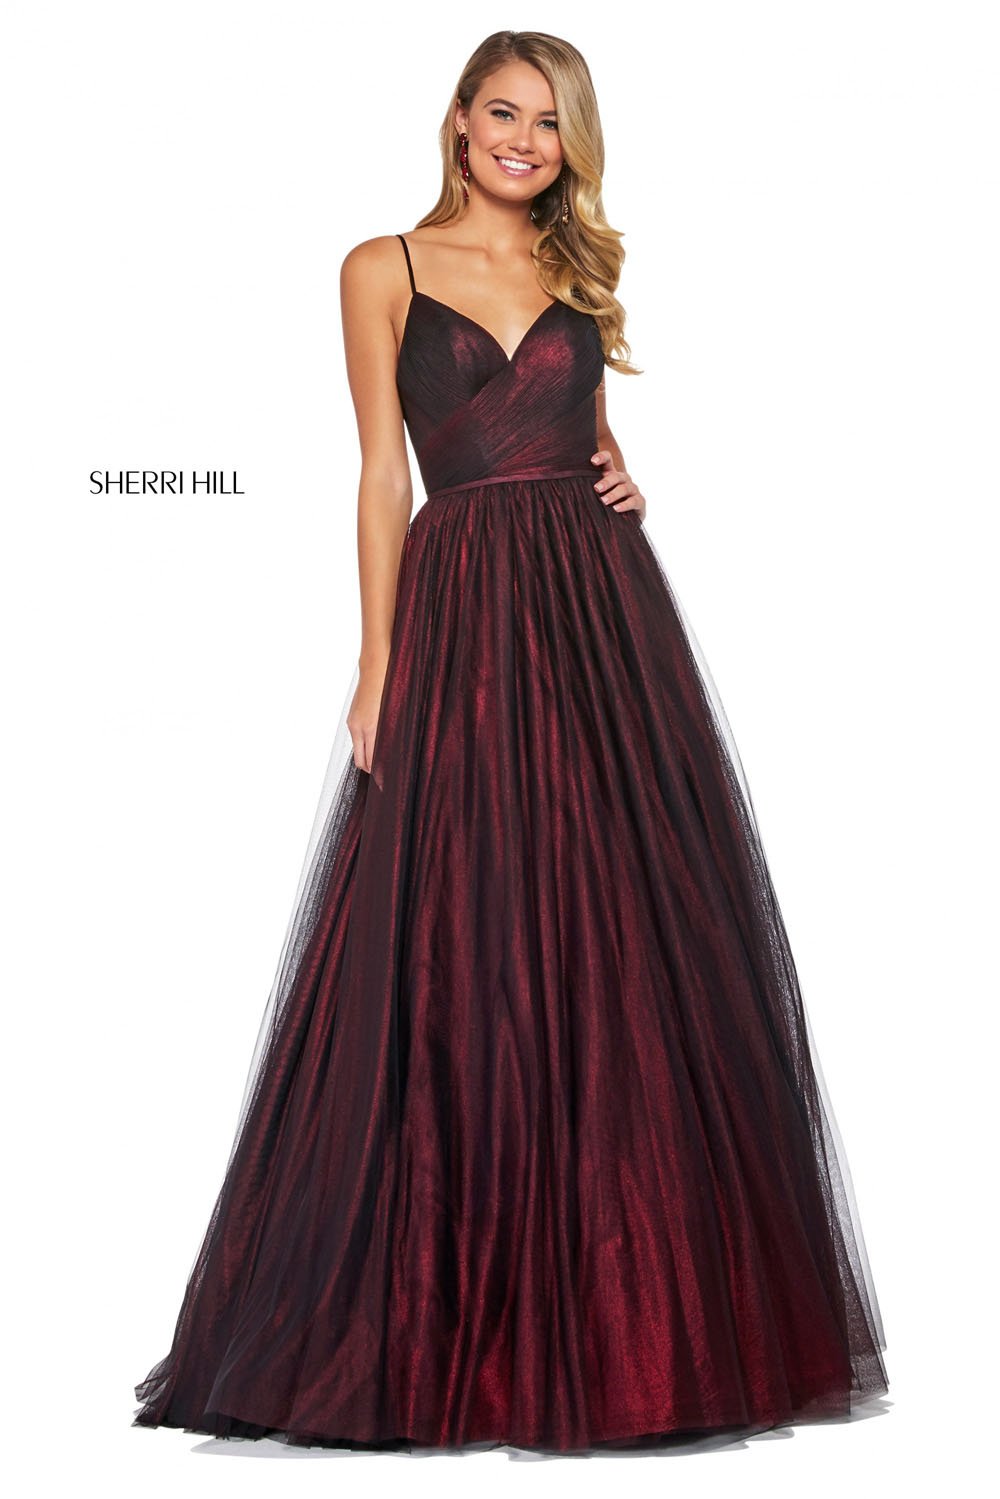 Sherri Hill 53480 dress images in these colors: Mocha, Wine, Emerald.